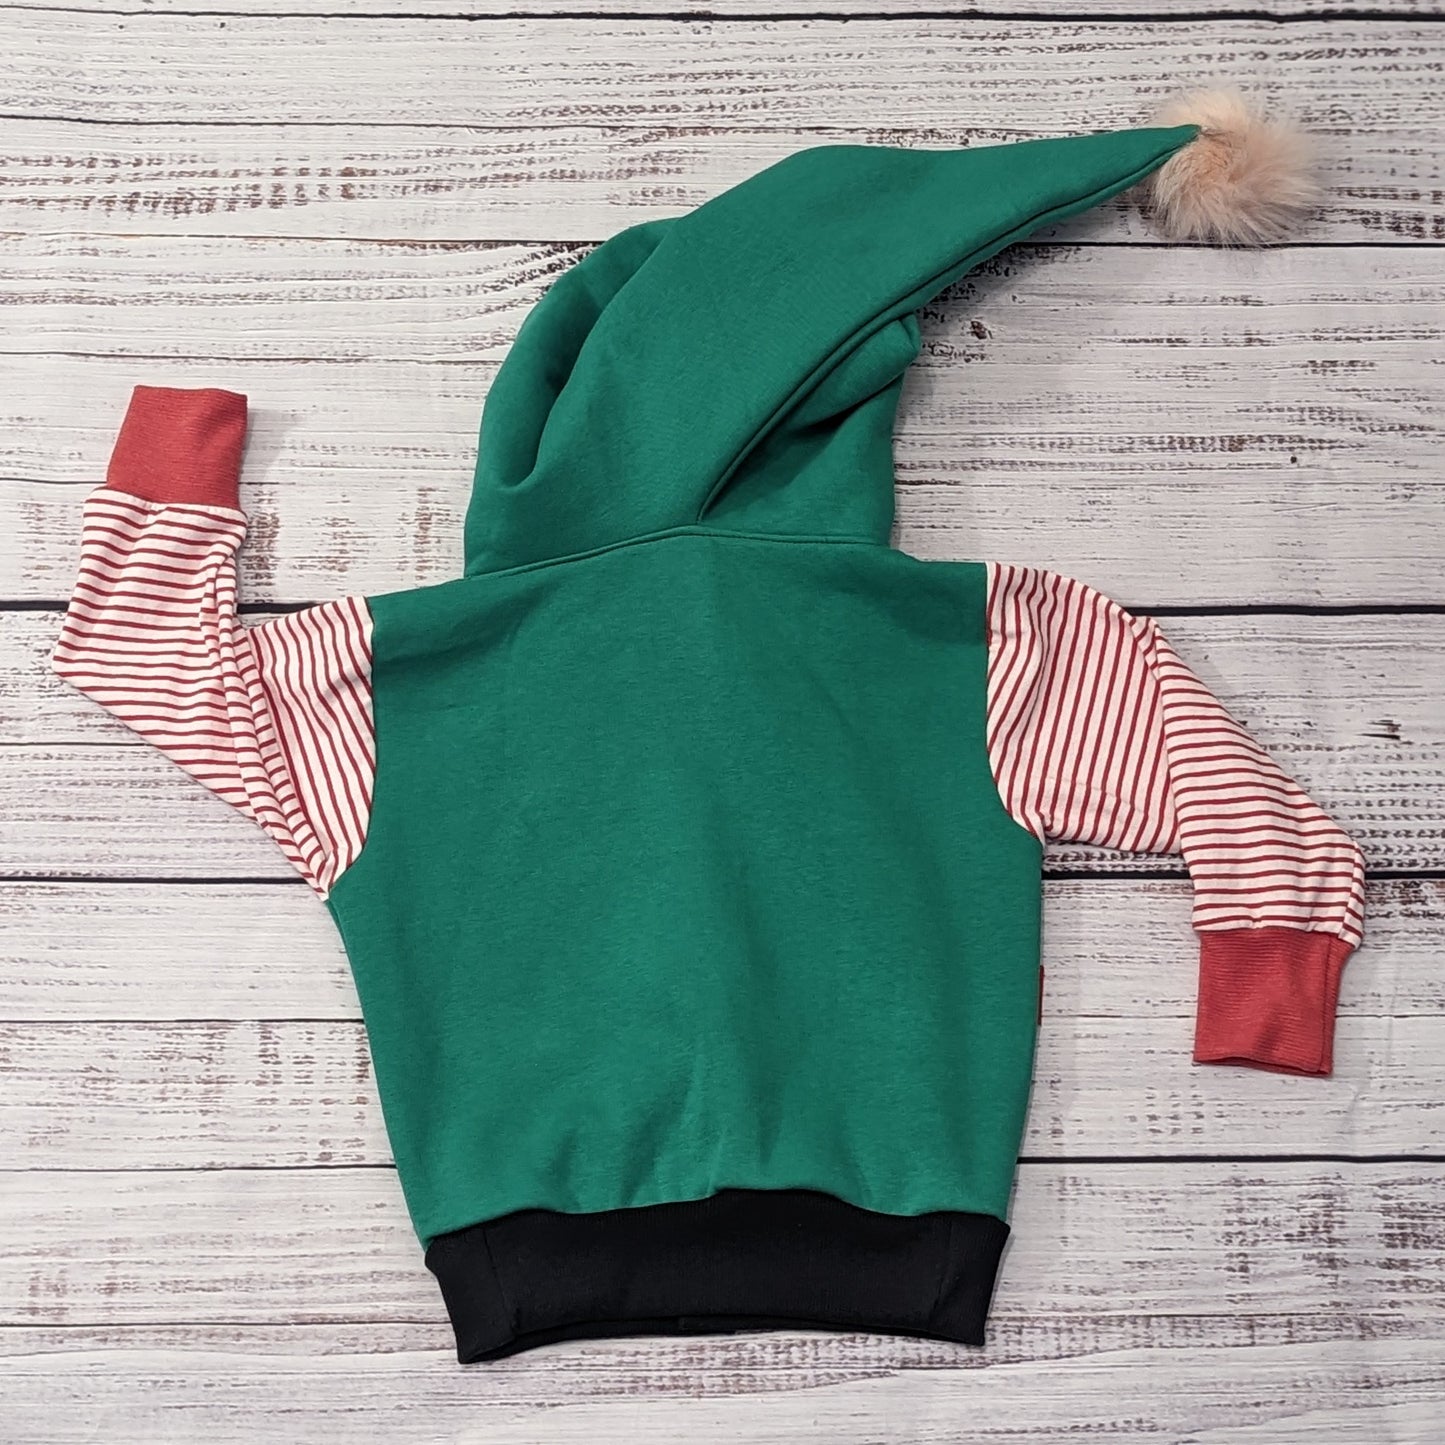 Rear view of the fantastically fun reversible elf hoodie. Handmade in green cotton sweatshirt fleece, with red striped cotton jersey arms, graphite ribbing waist and red ribbing cuffs . With adorable pom-pom hood.